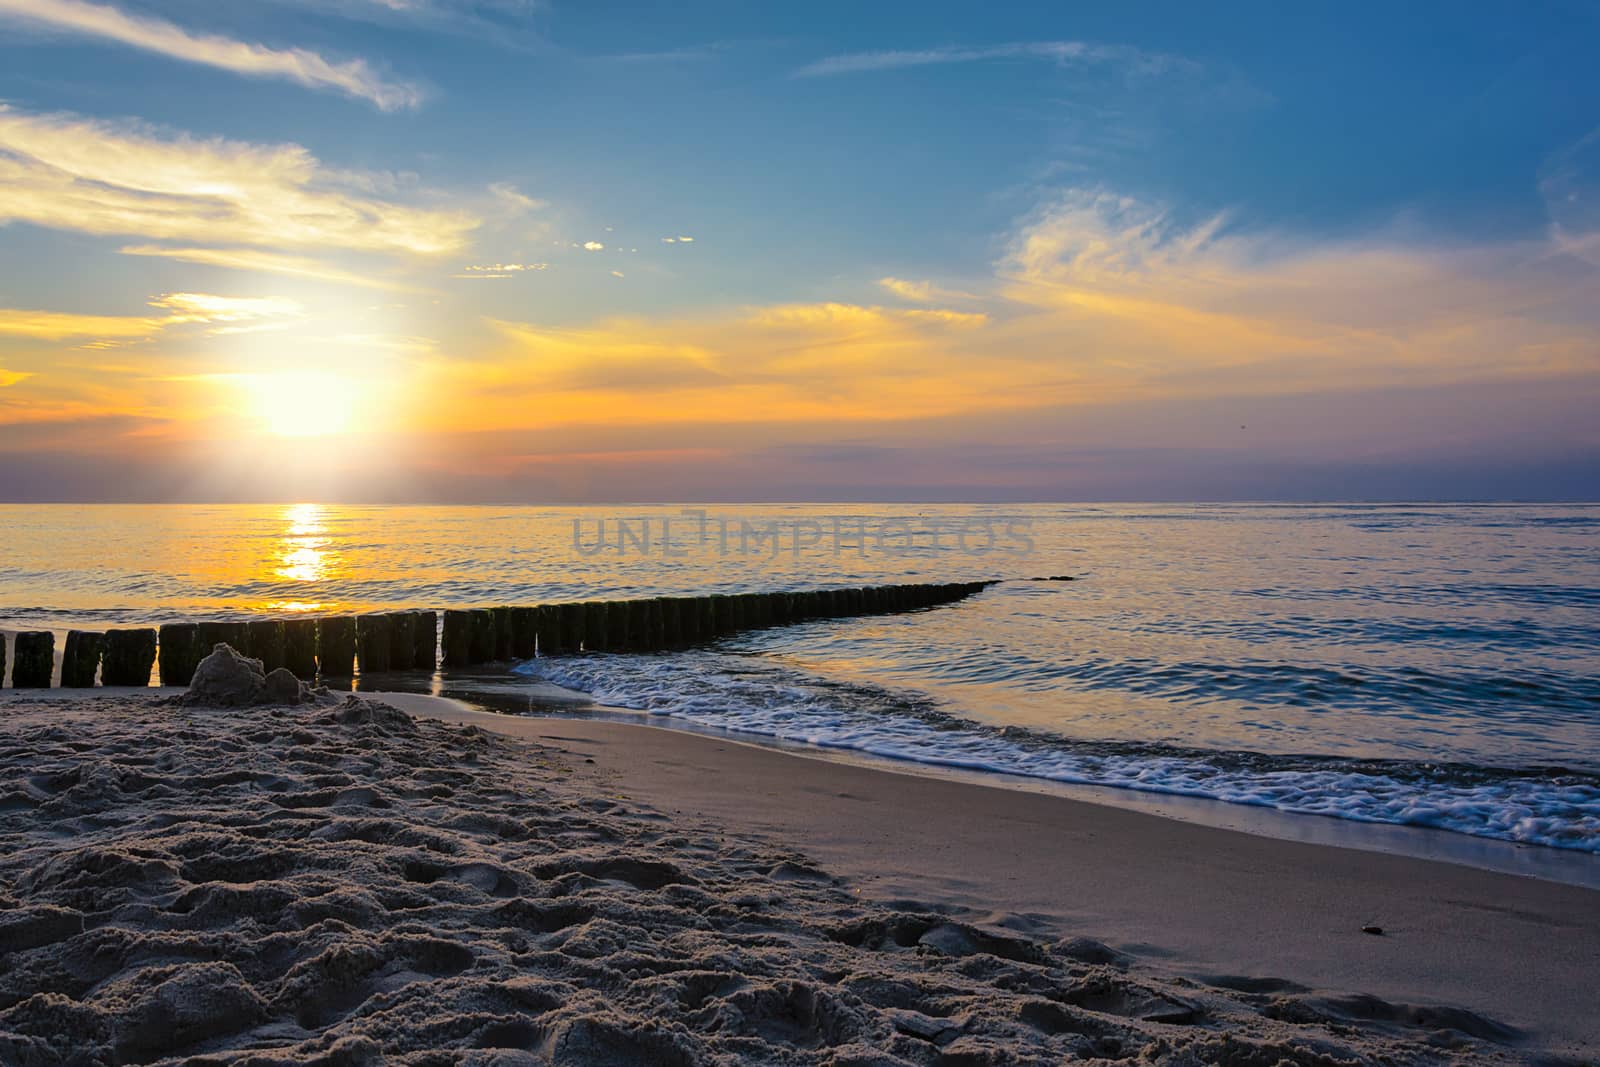 Sand on the beach and rippling sea on the background of the picturesque sky at sunset.